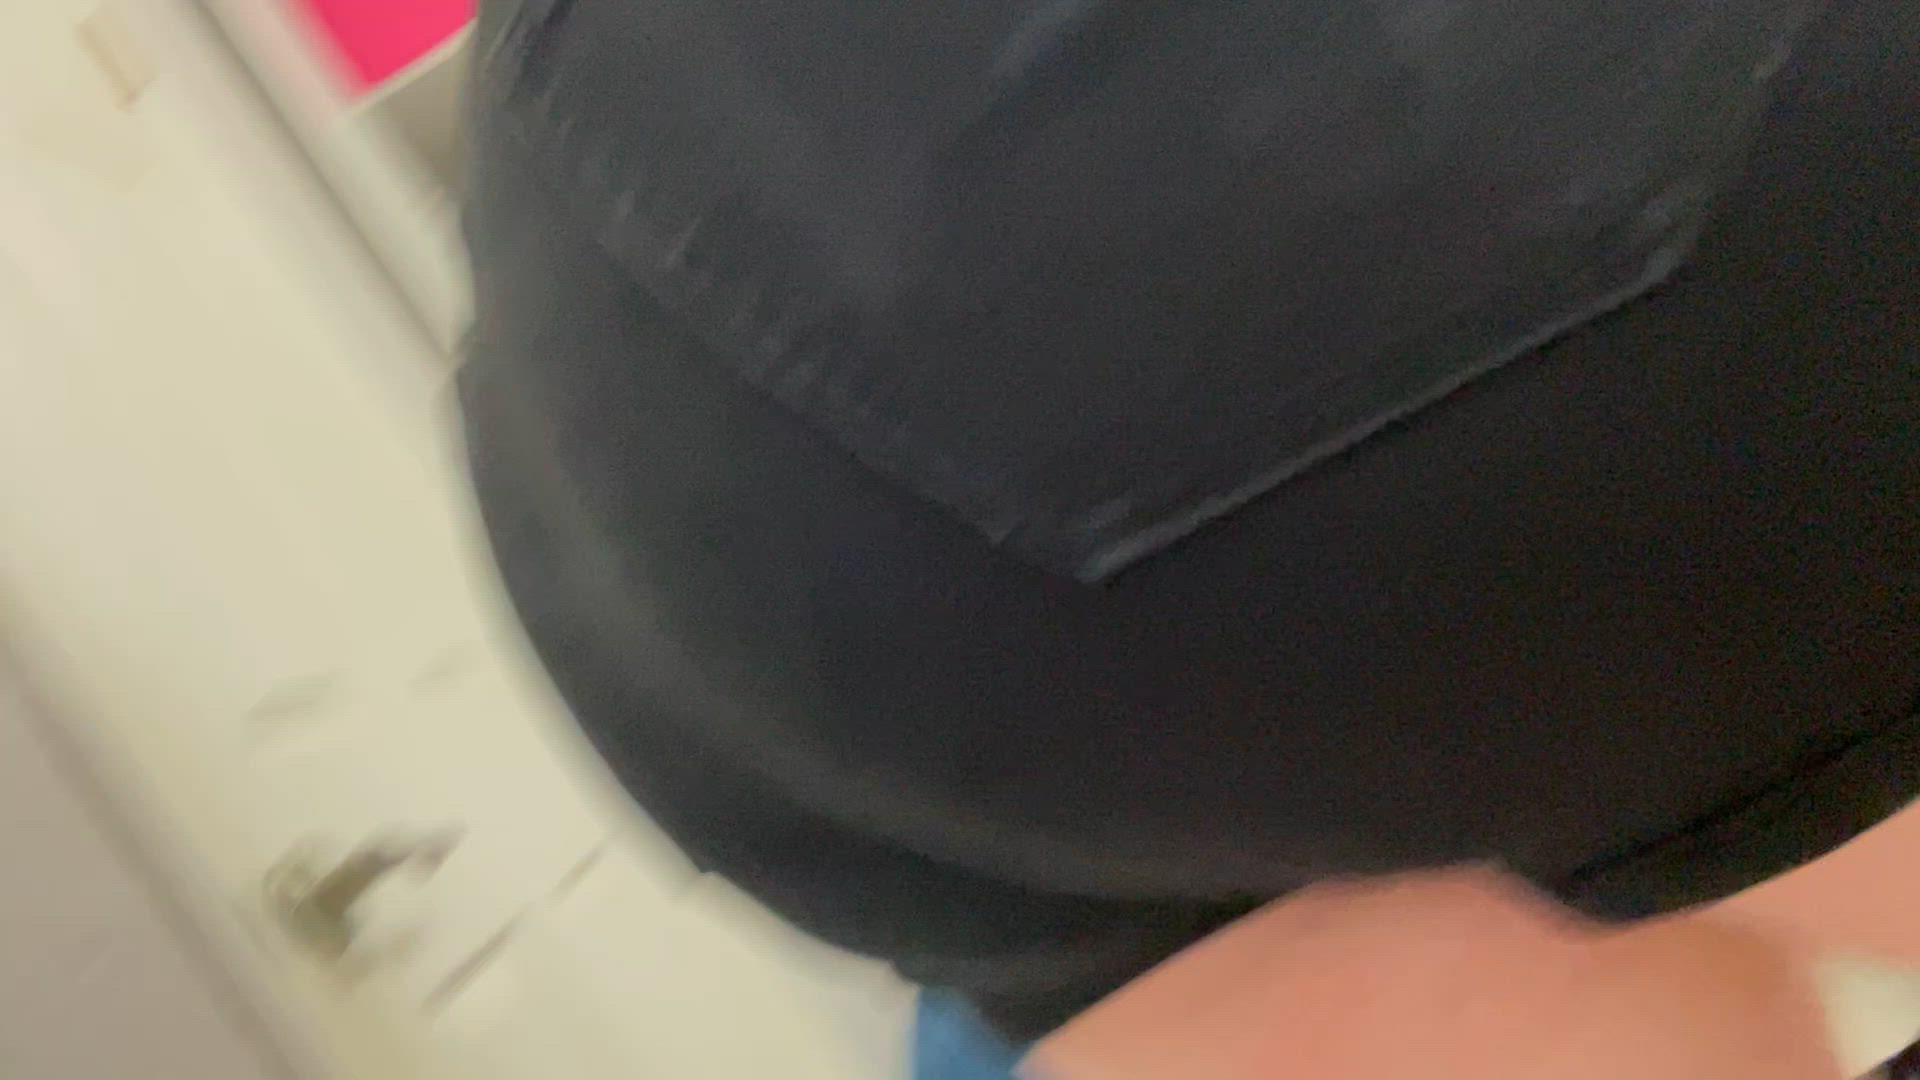 Ass porn video with onlyfans model thiccinkedmama12 <strong>@thiccinkedmama12</strong>